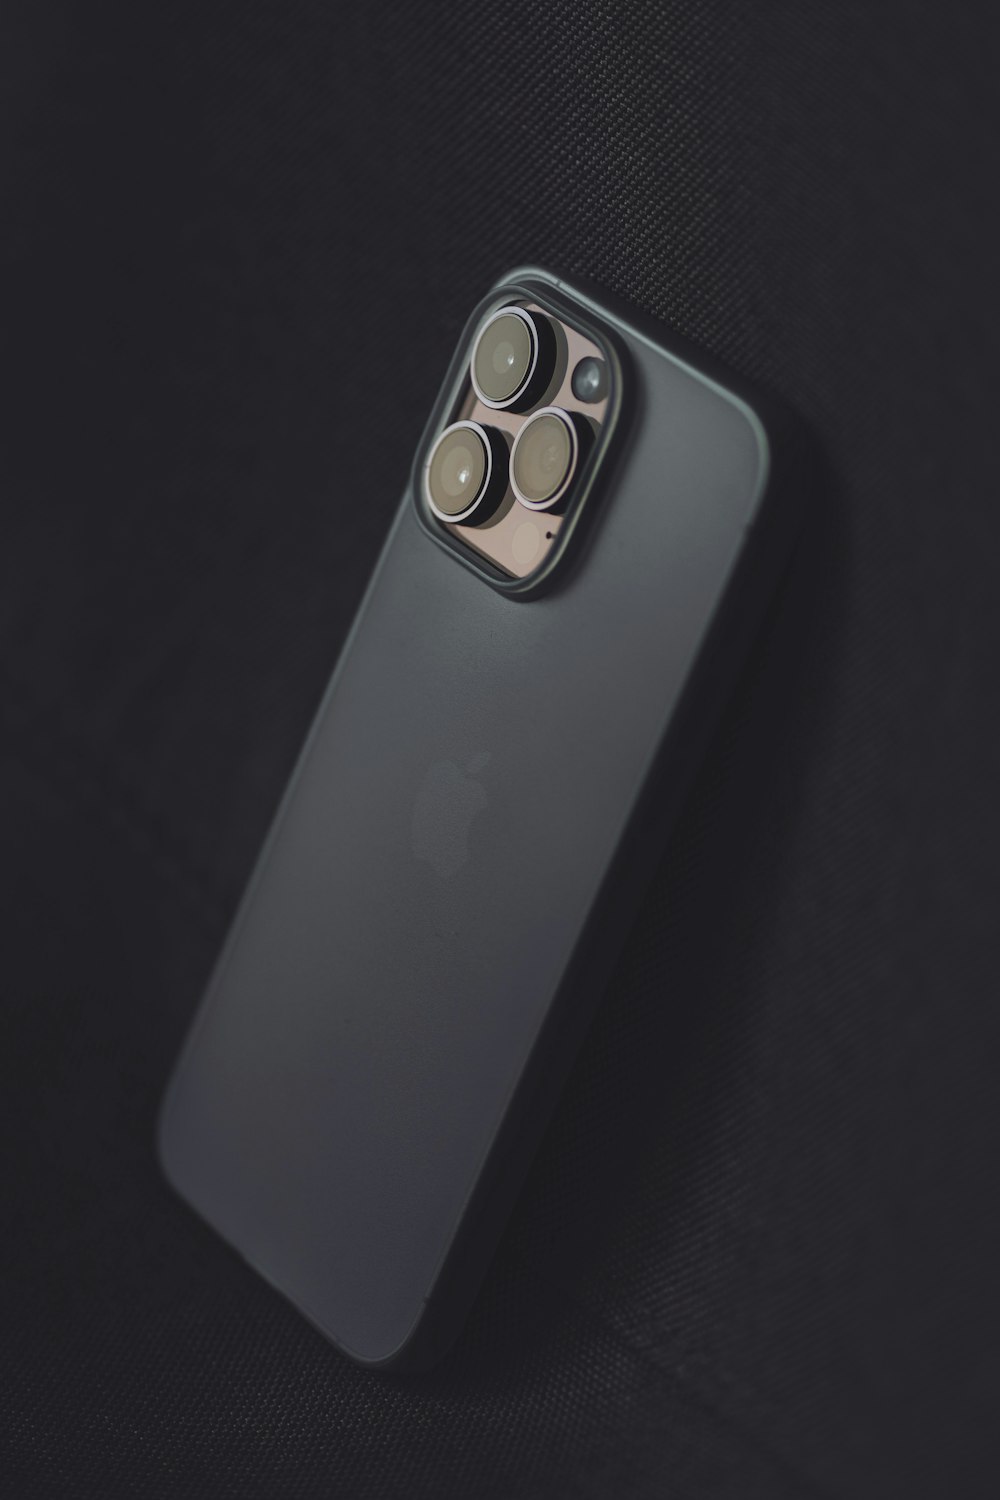 the back of an iphone 11 pro with a camera attached